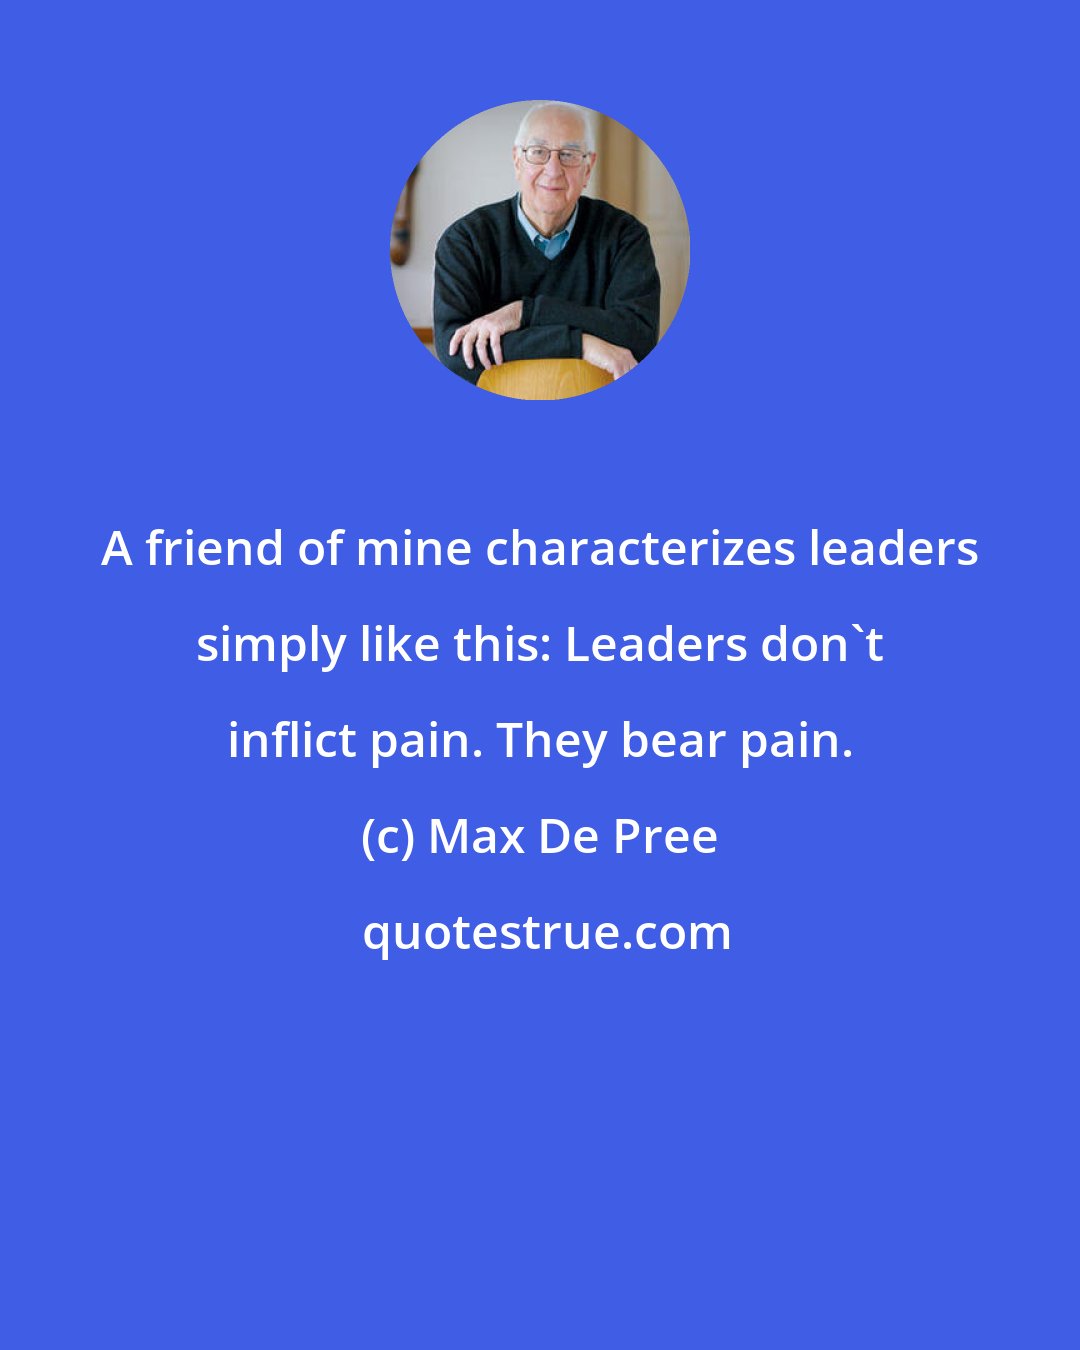 Max De Pree: A friend of mine characterizes leaders simply like this: Leaders don't inflict pain. They bear pain.